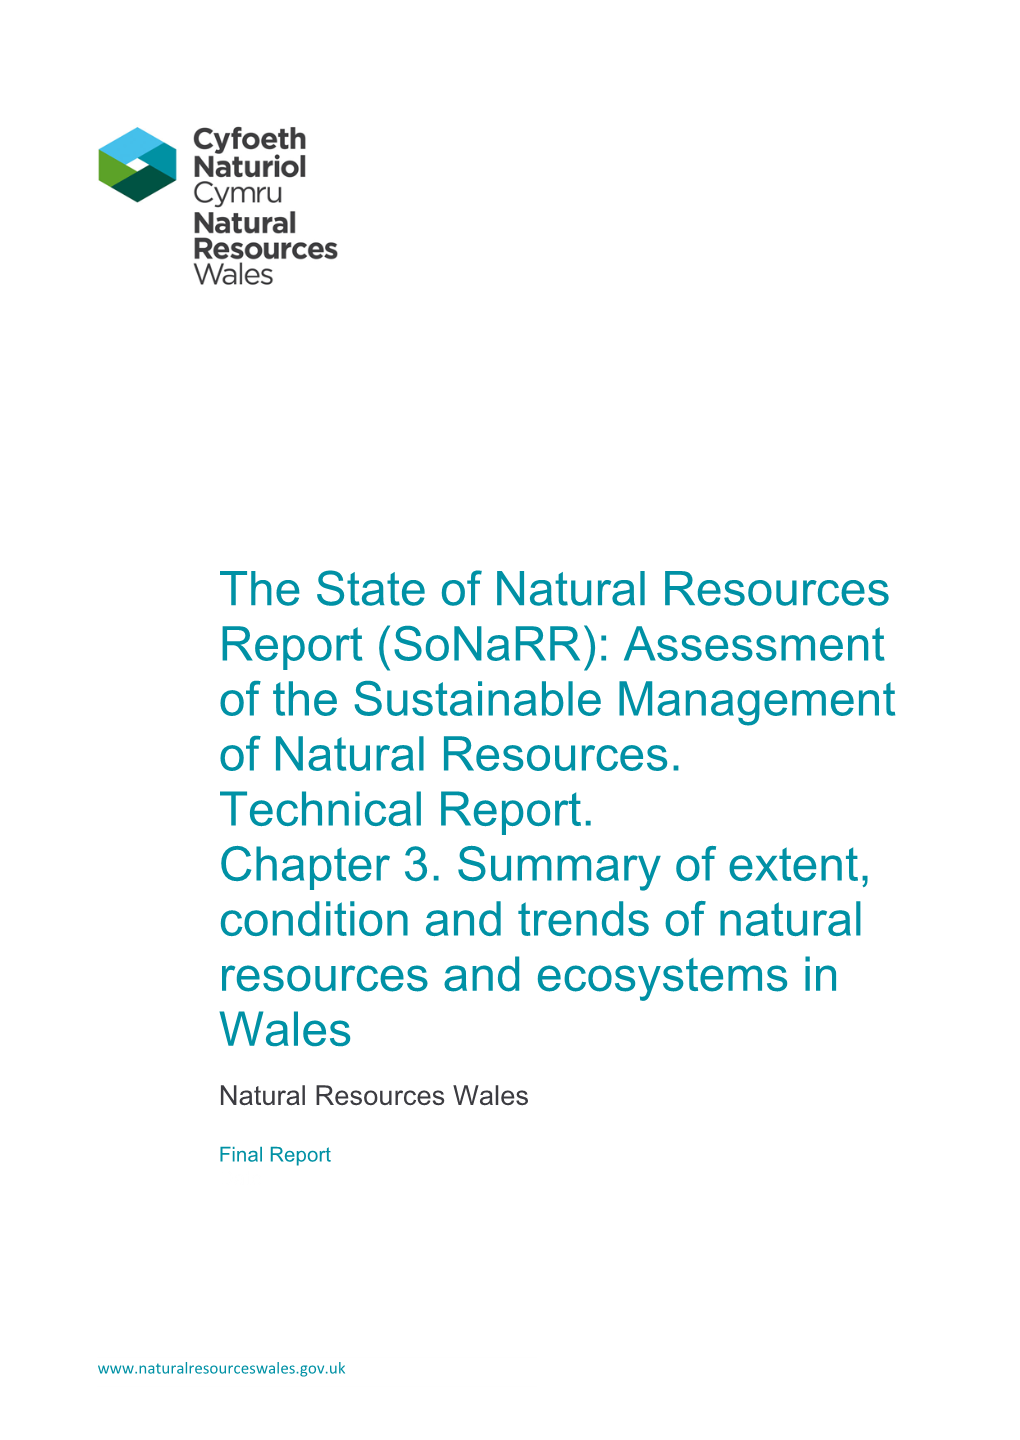 (Sonarr): Assessment of the Sustainable Management of Natural Resources